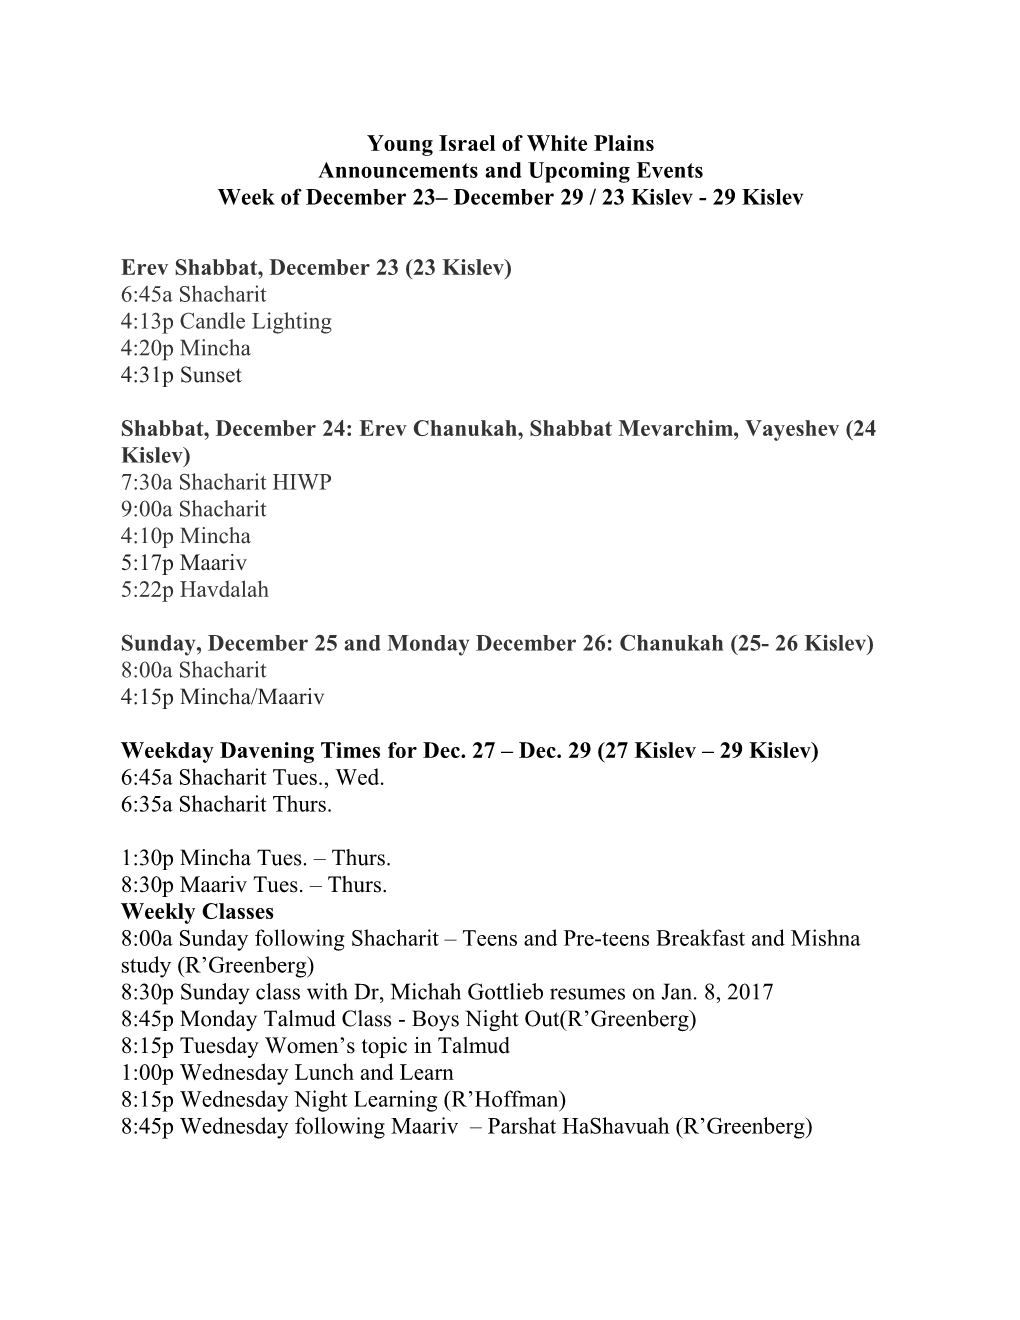 Young Israel of White Plains Announcementsand Upcoming Events Week Ofdecember 23 December